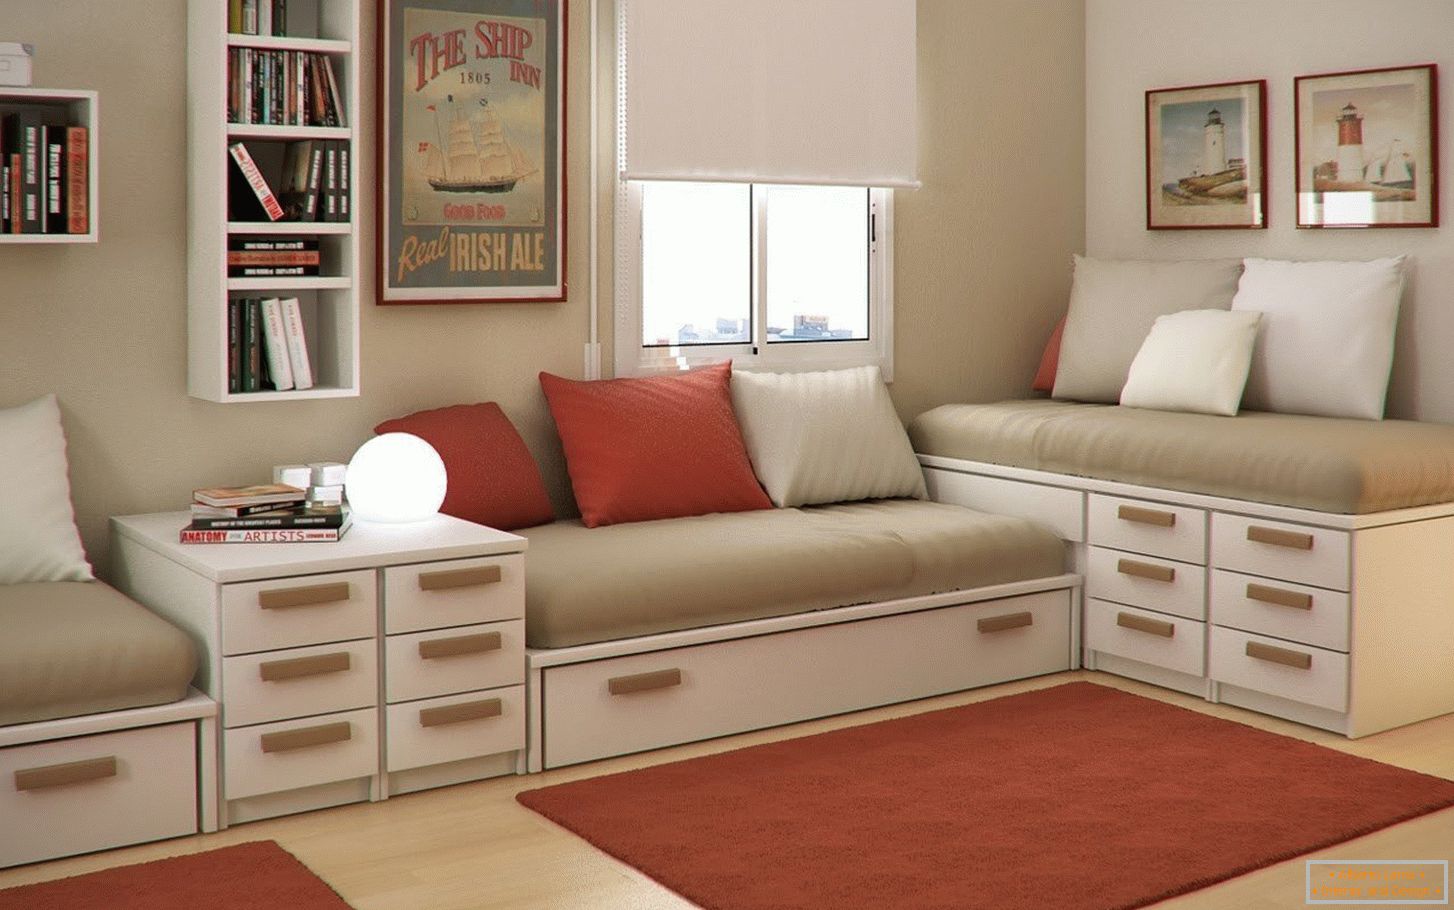 Sofas with drawers in the room